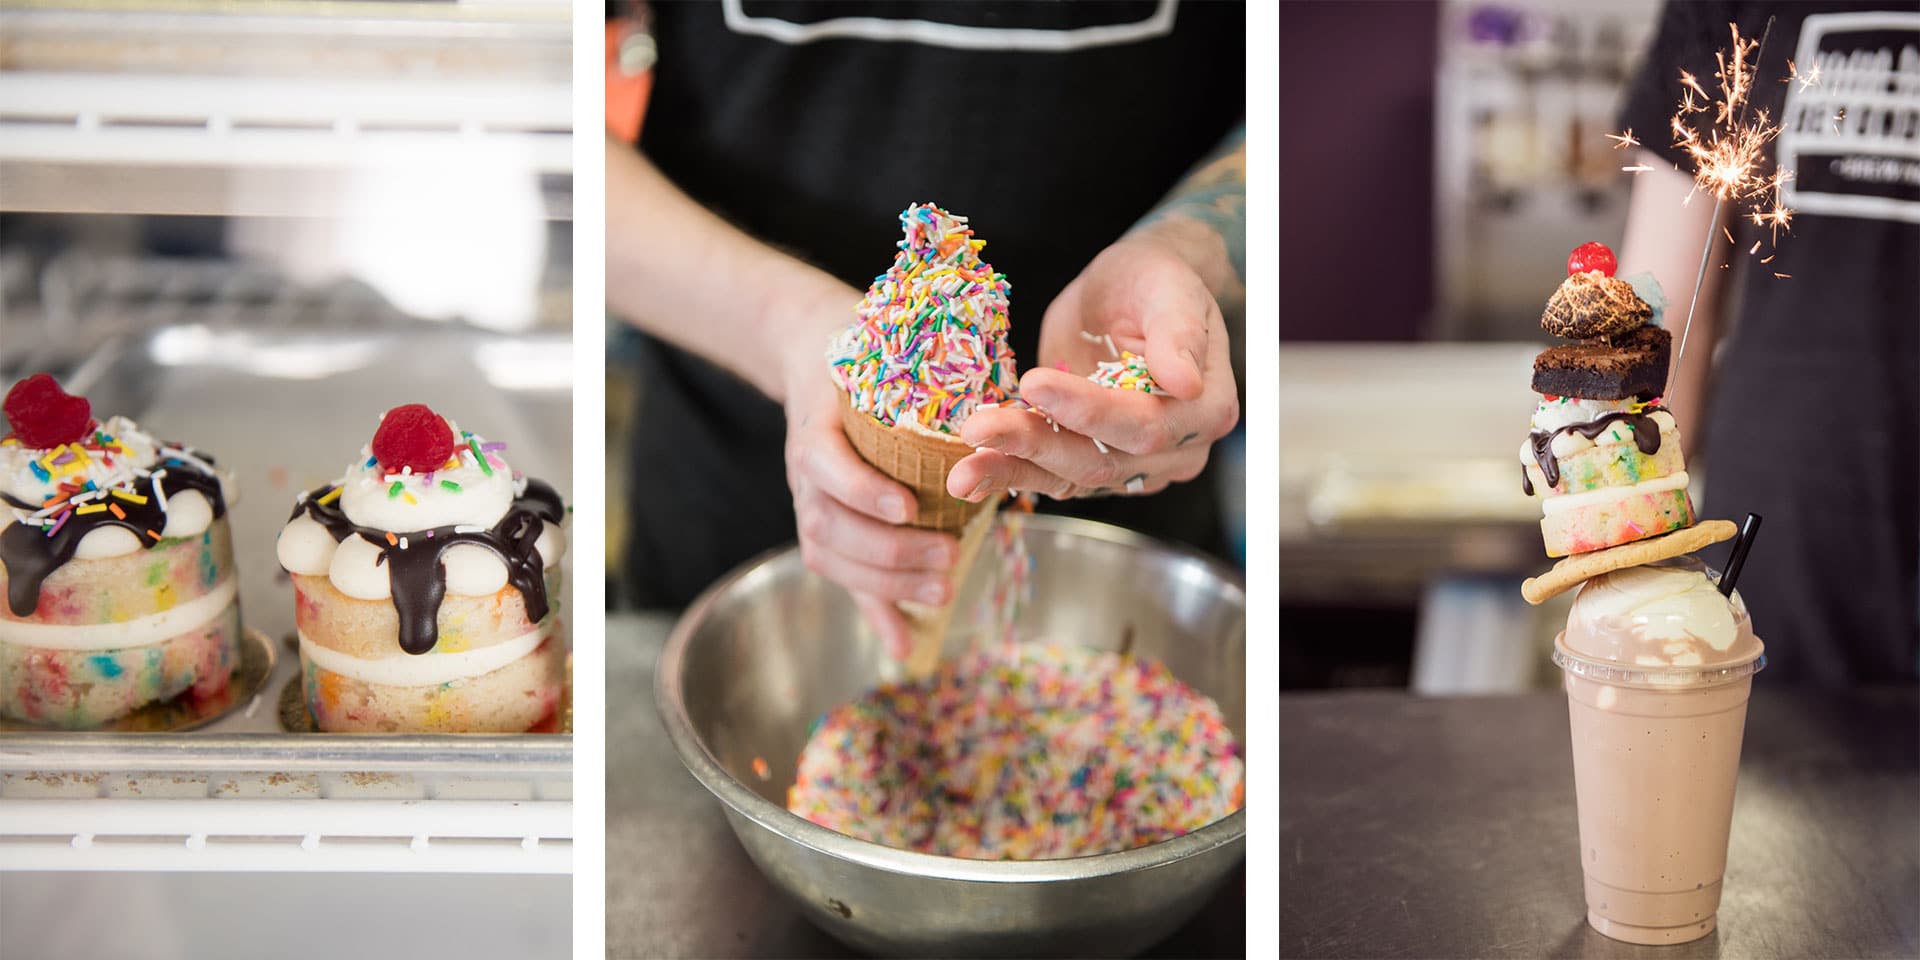 Craving Ice Cream? Here’s 4 Ottawa Hot Spots to Cool Down at This Summer